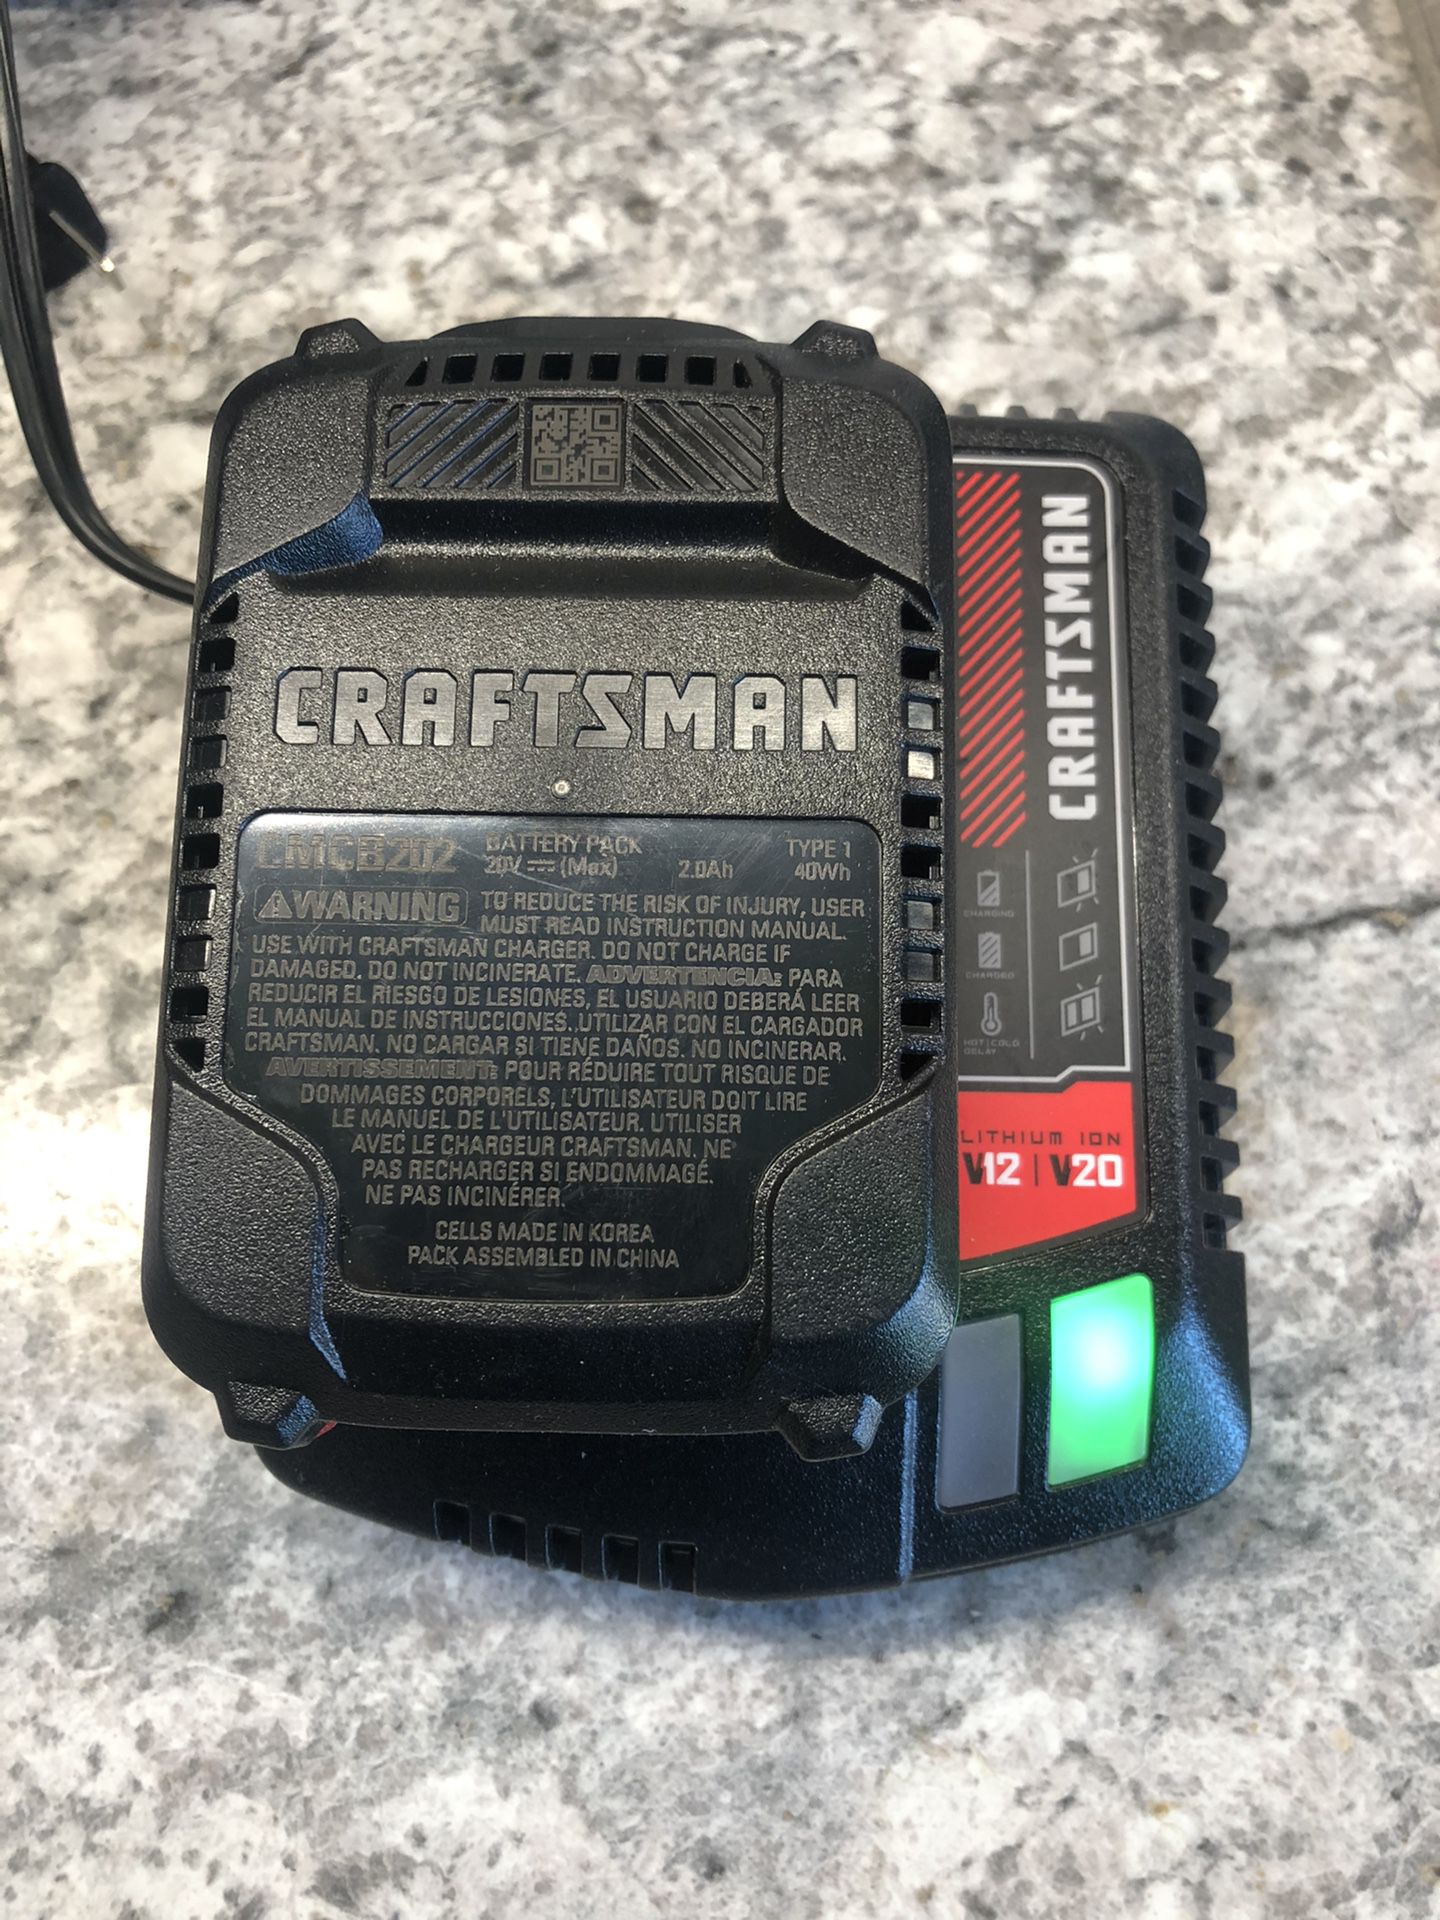 Craftsman’s 20v battery and charger